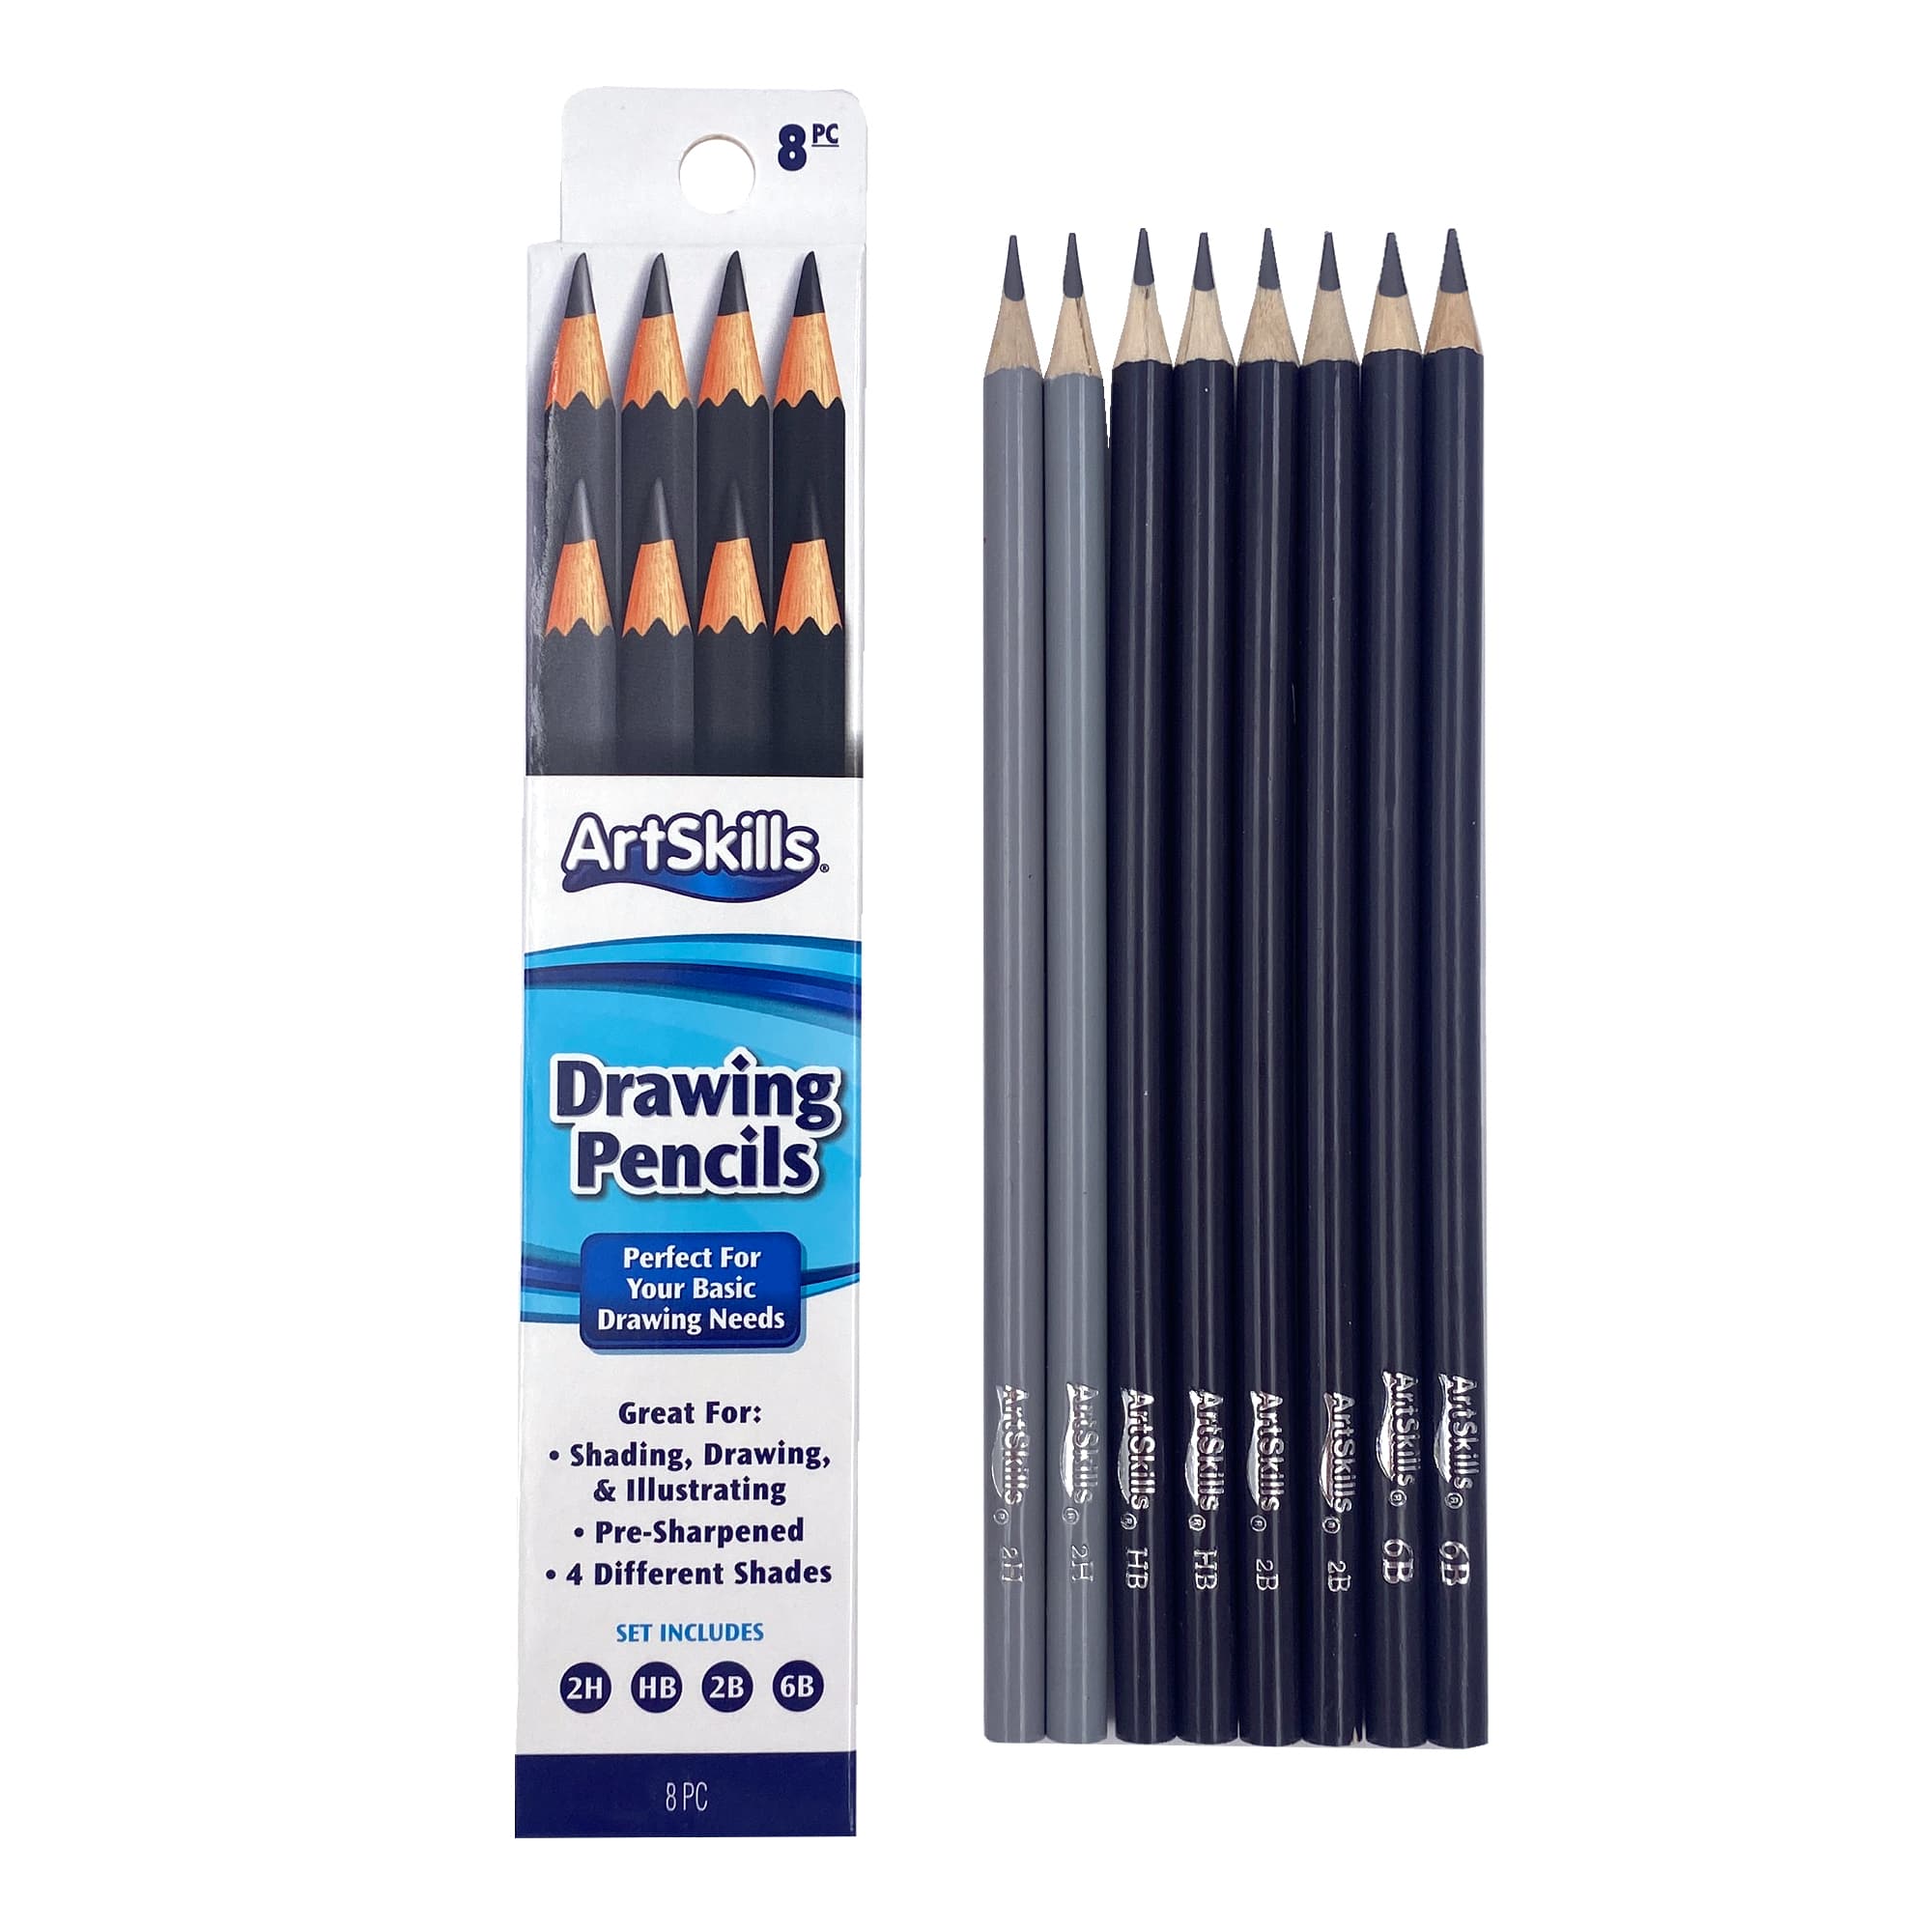 Graphite Pencils and Pencils for Drawing & Sketching